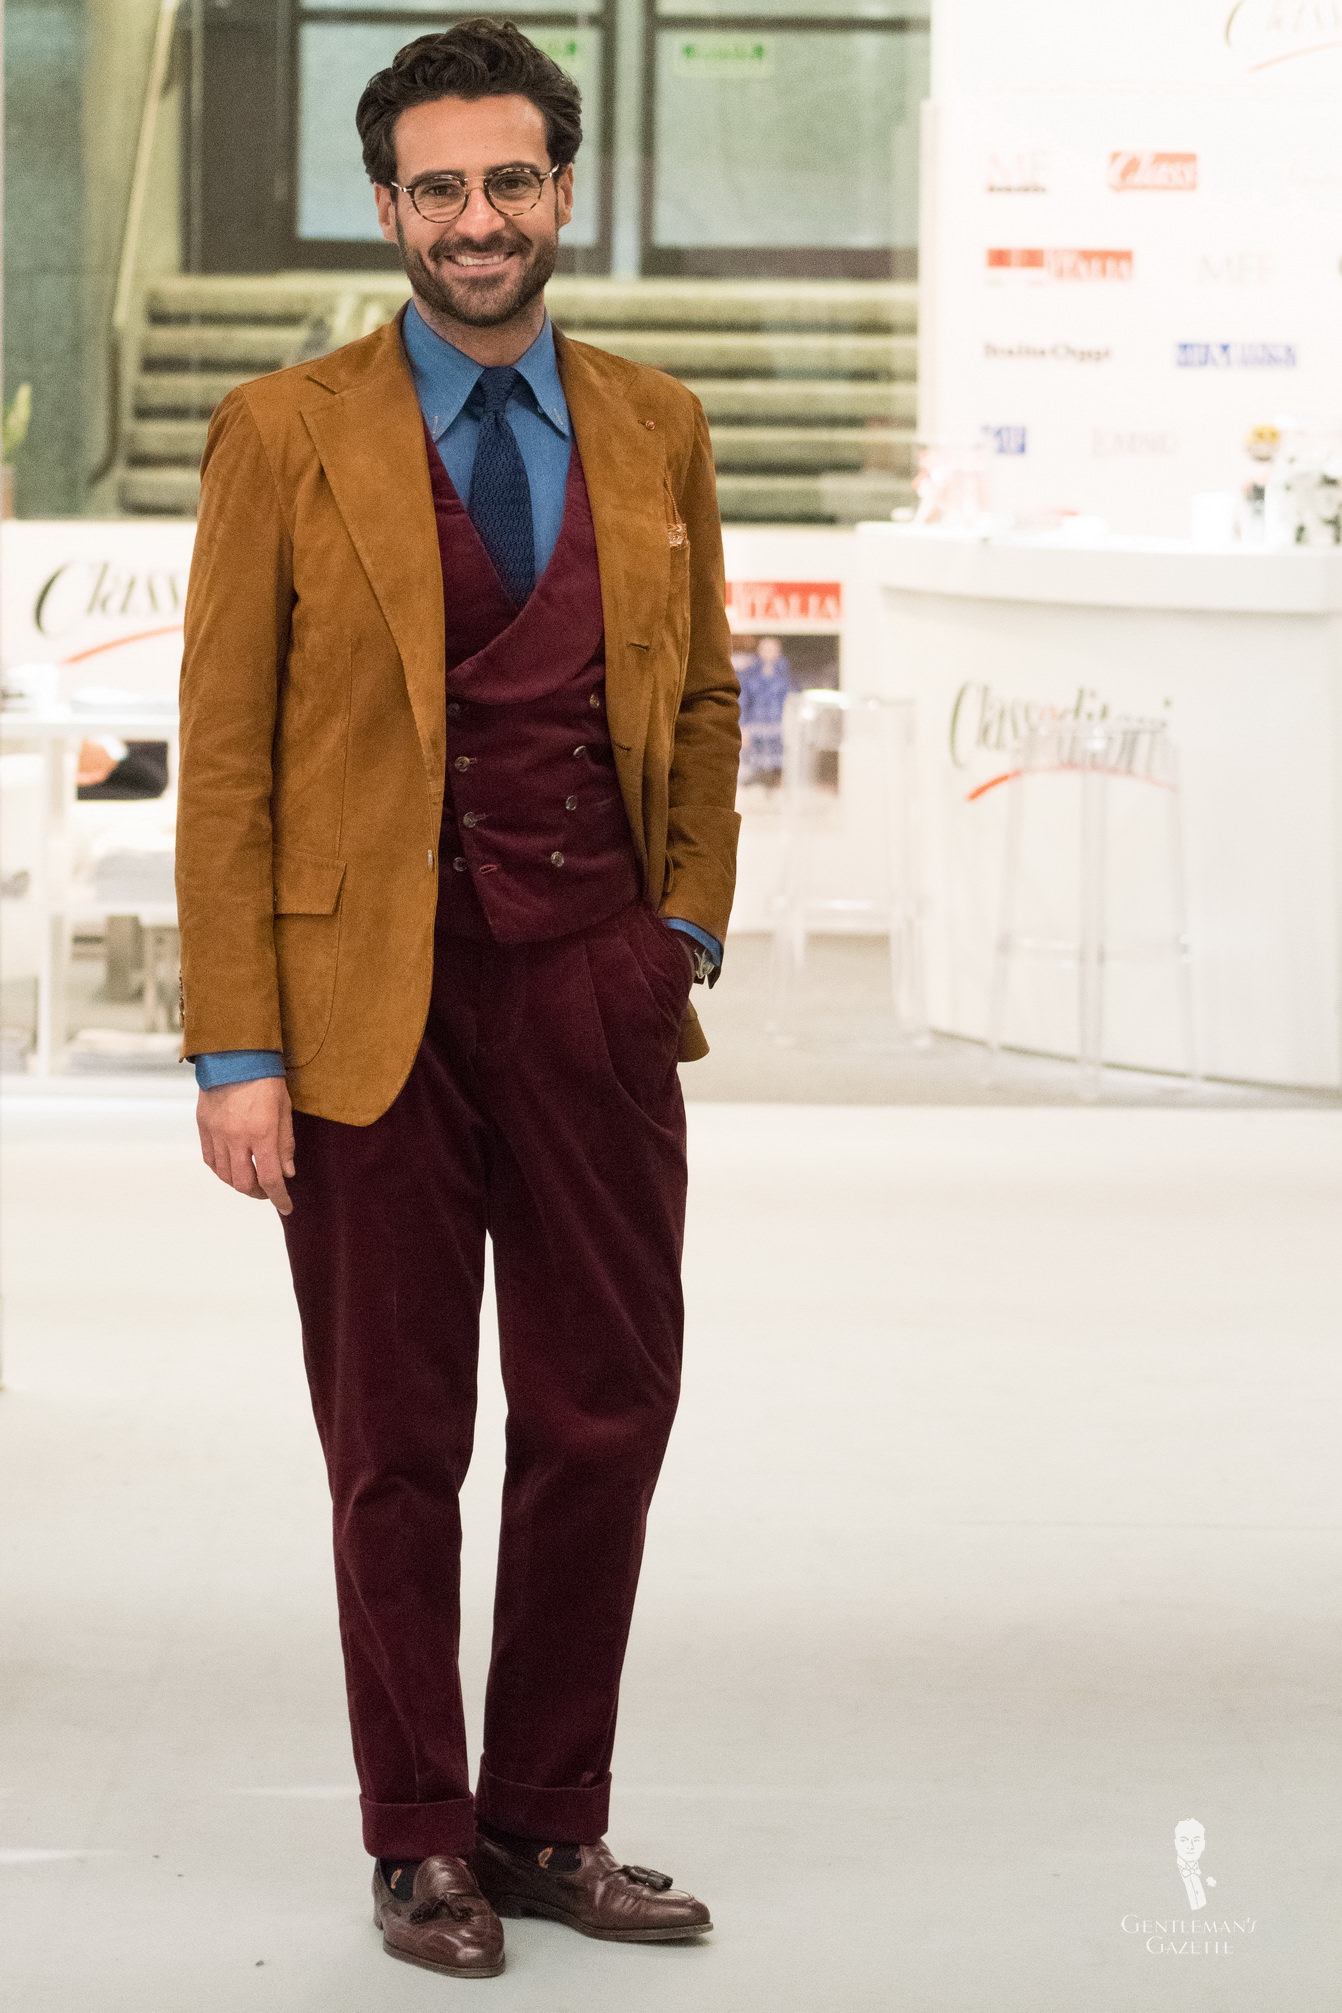 Leather sport coat with burgundy corduroy vest and trousers paired with denim shirt